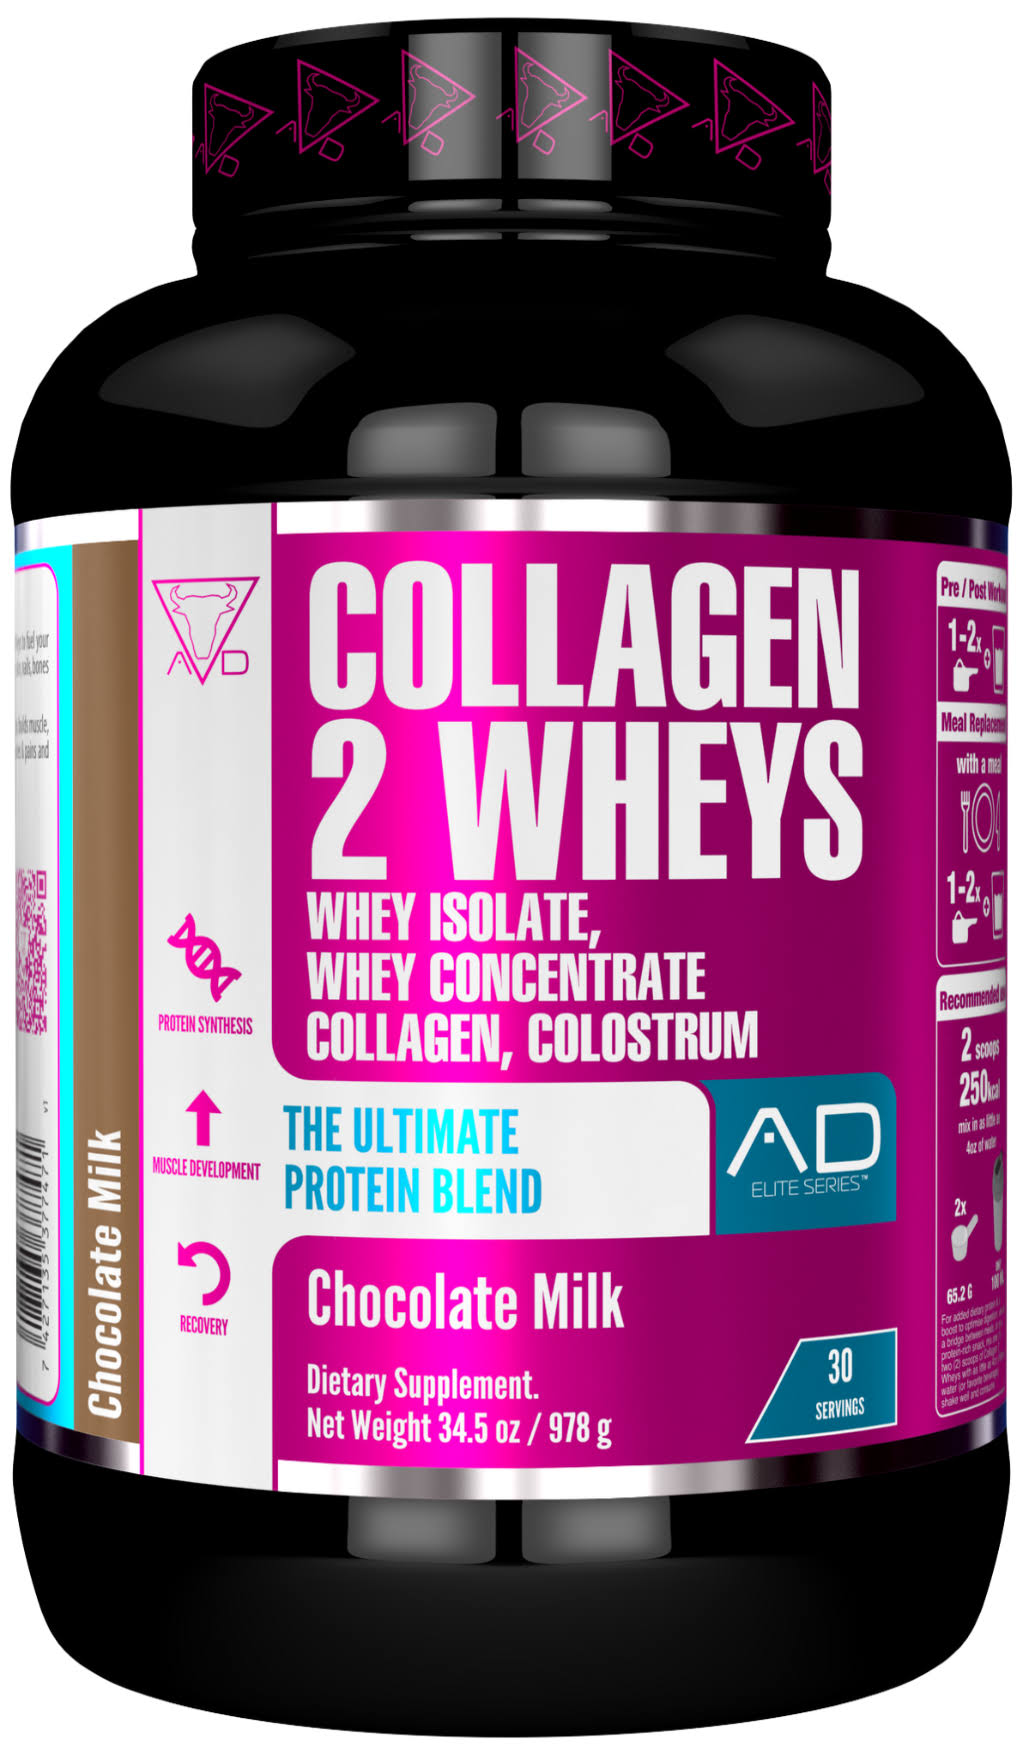 Project Ad Collagen 2 Wheys Chocolate Milk - 30 Servings